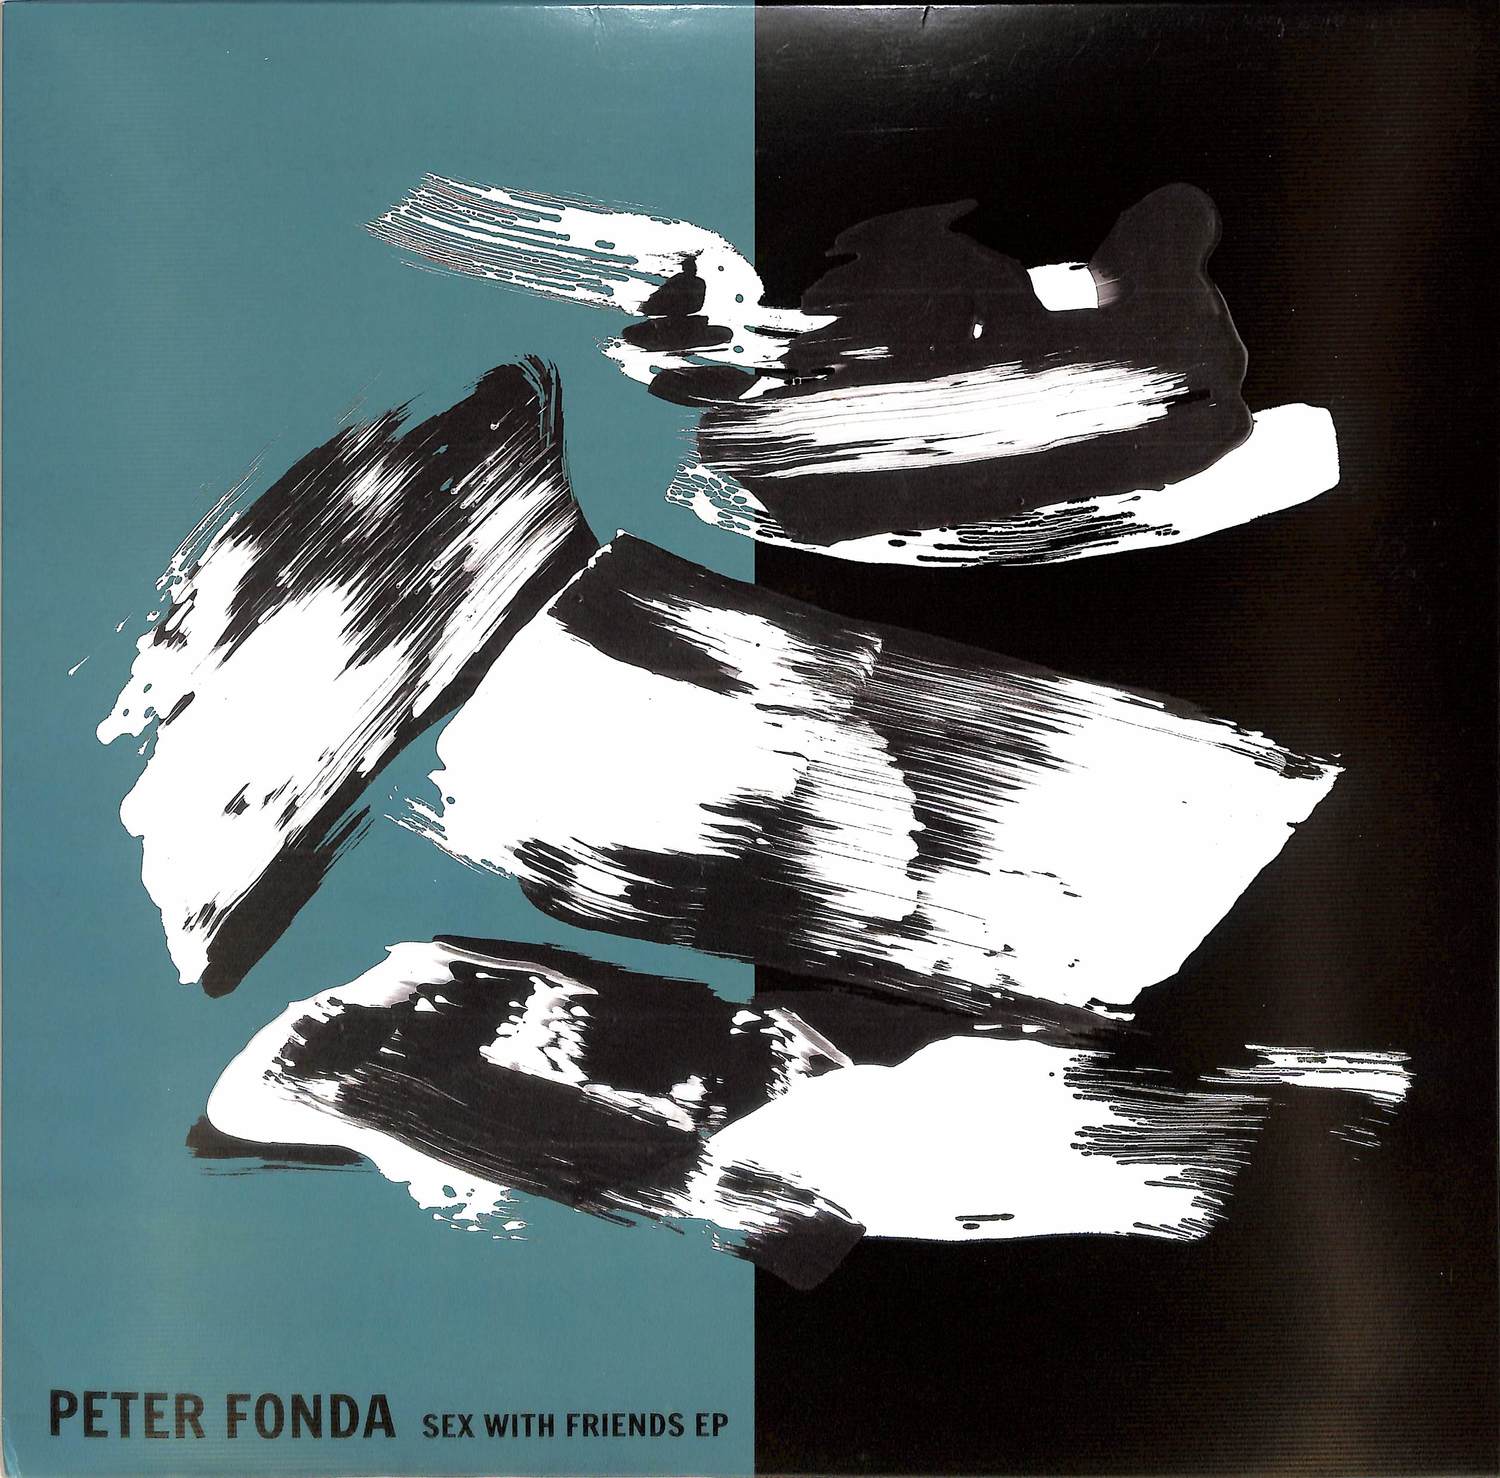 Peter Fonda - SEX WITH FRIENDS EP